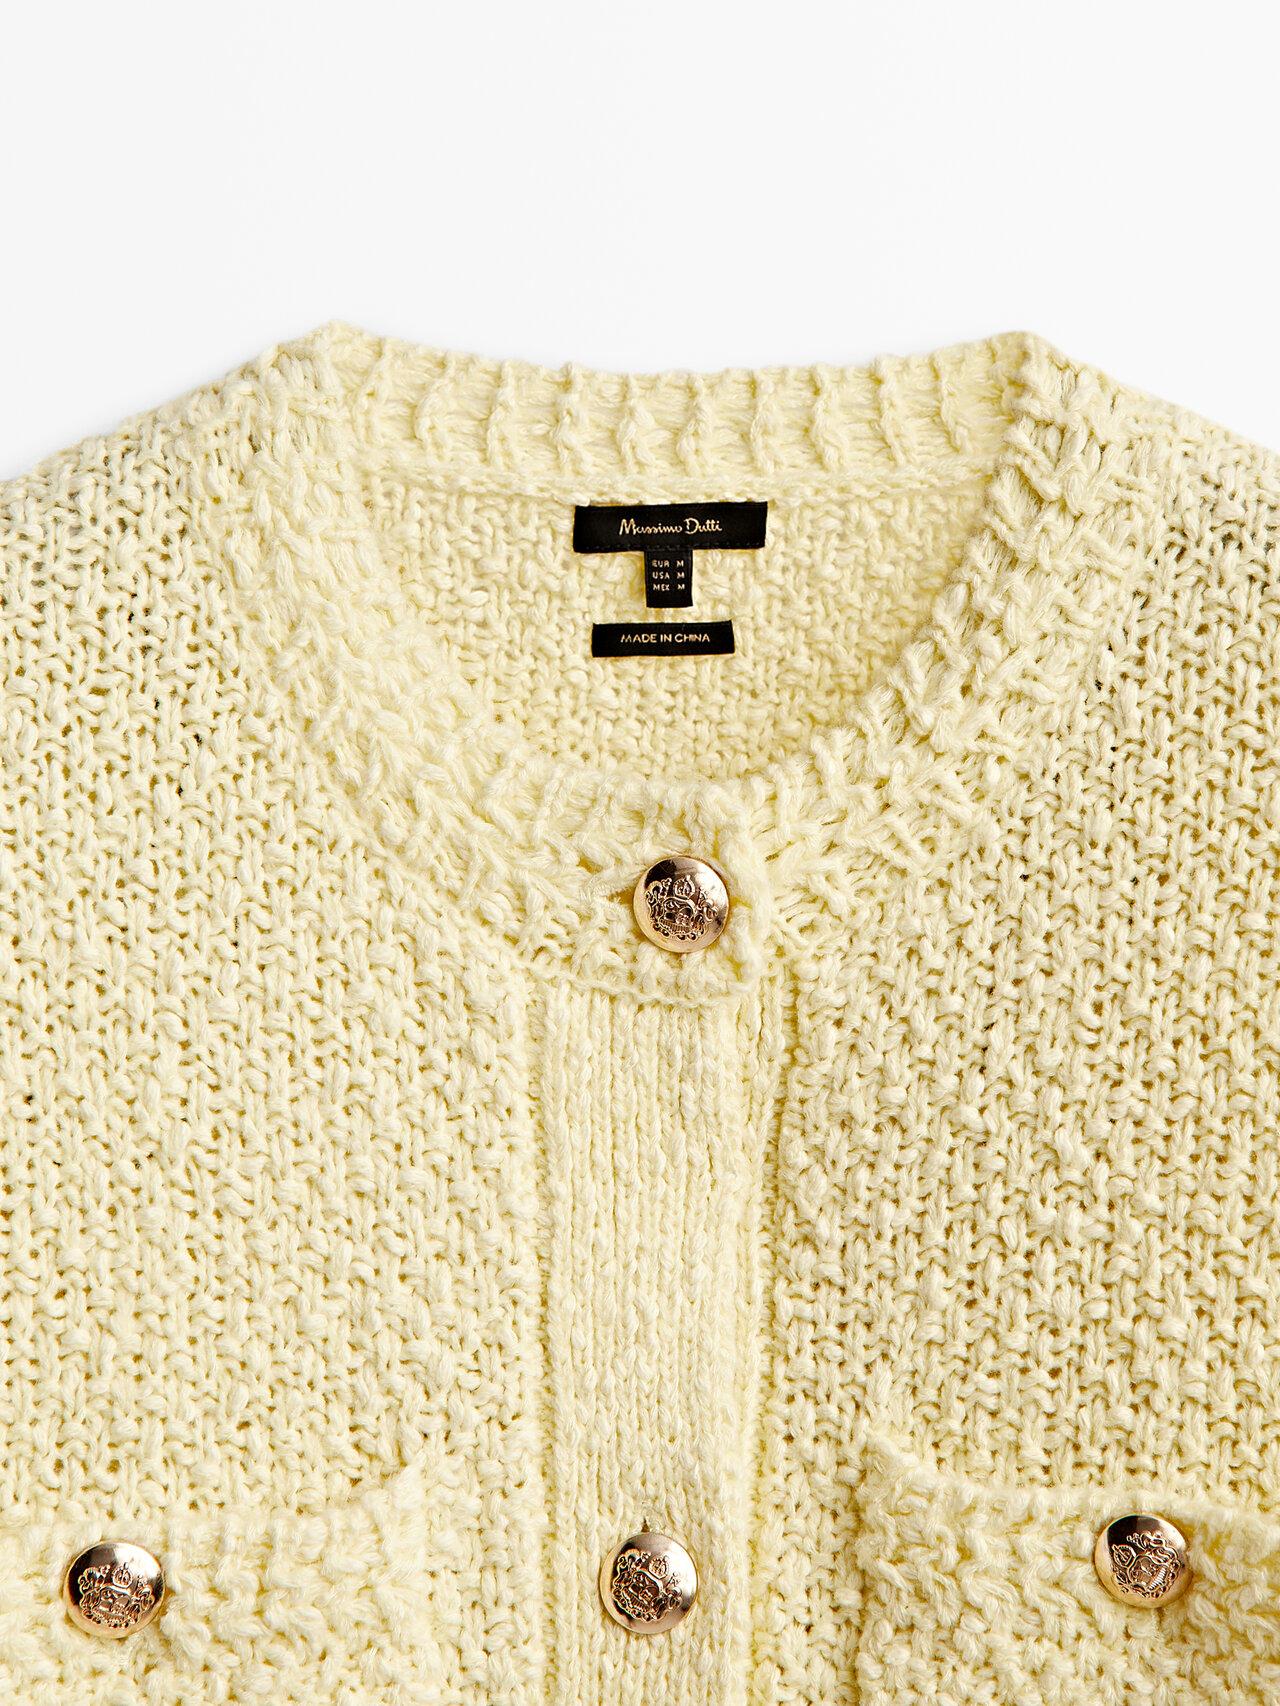 MASSIMO DUTTI Short Sleeve Knit Cardigan With Pockets in Natural | Lyst